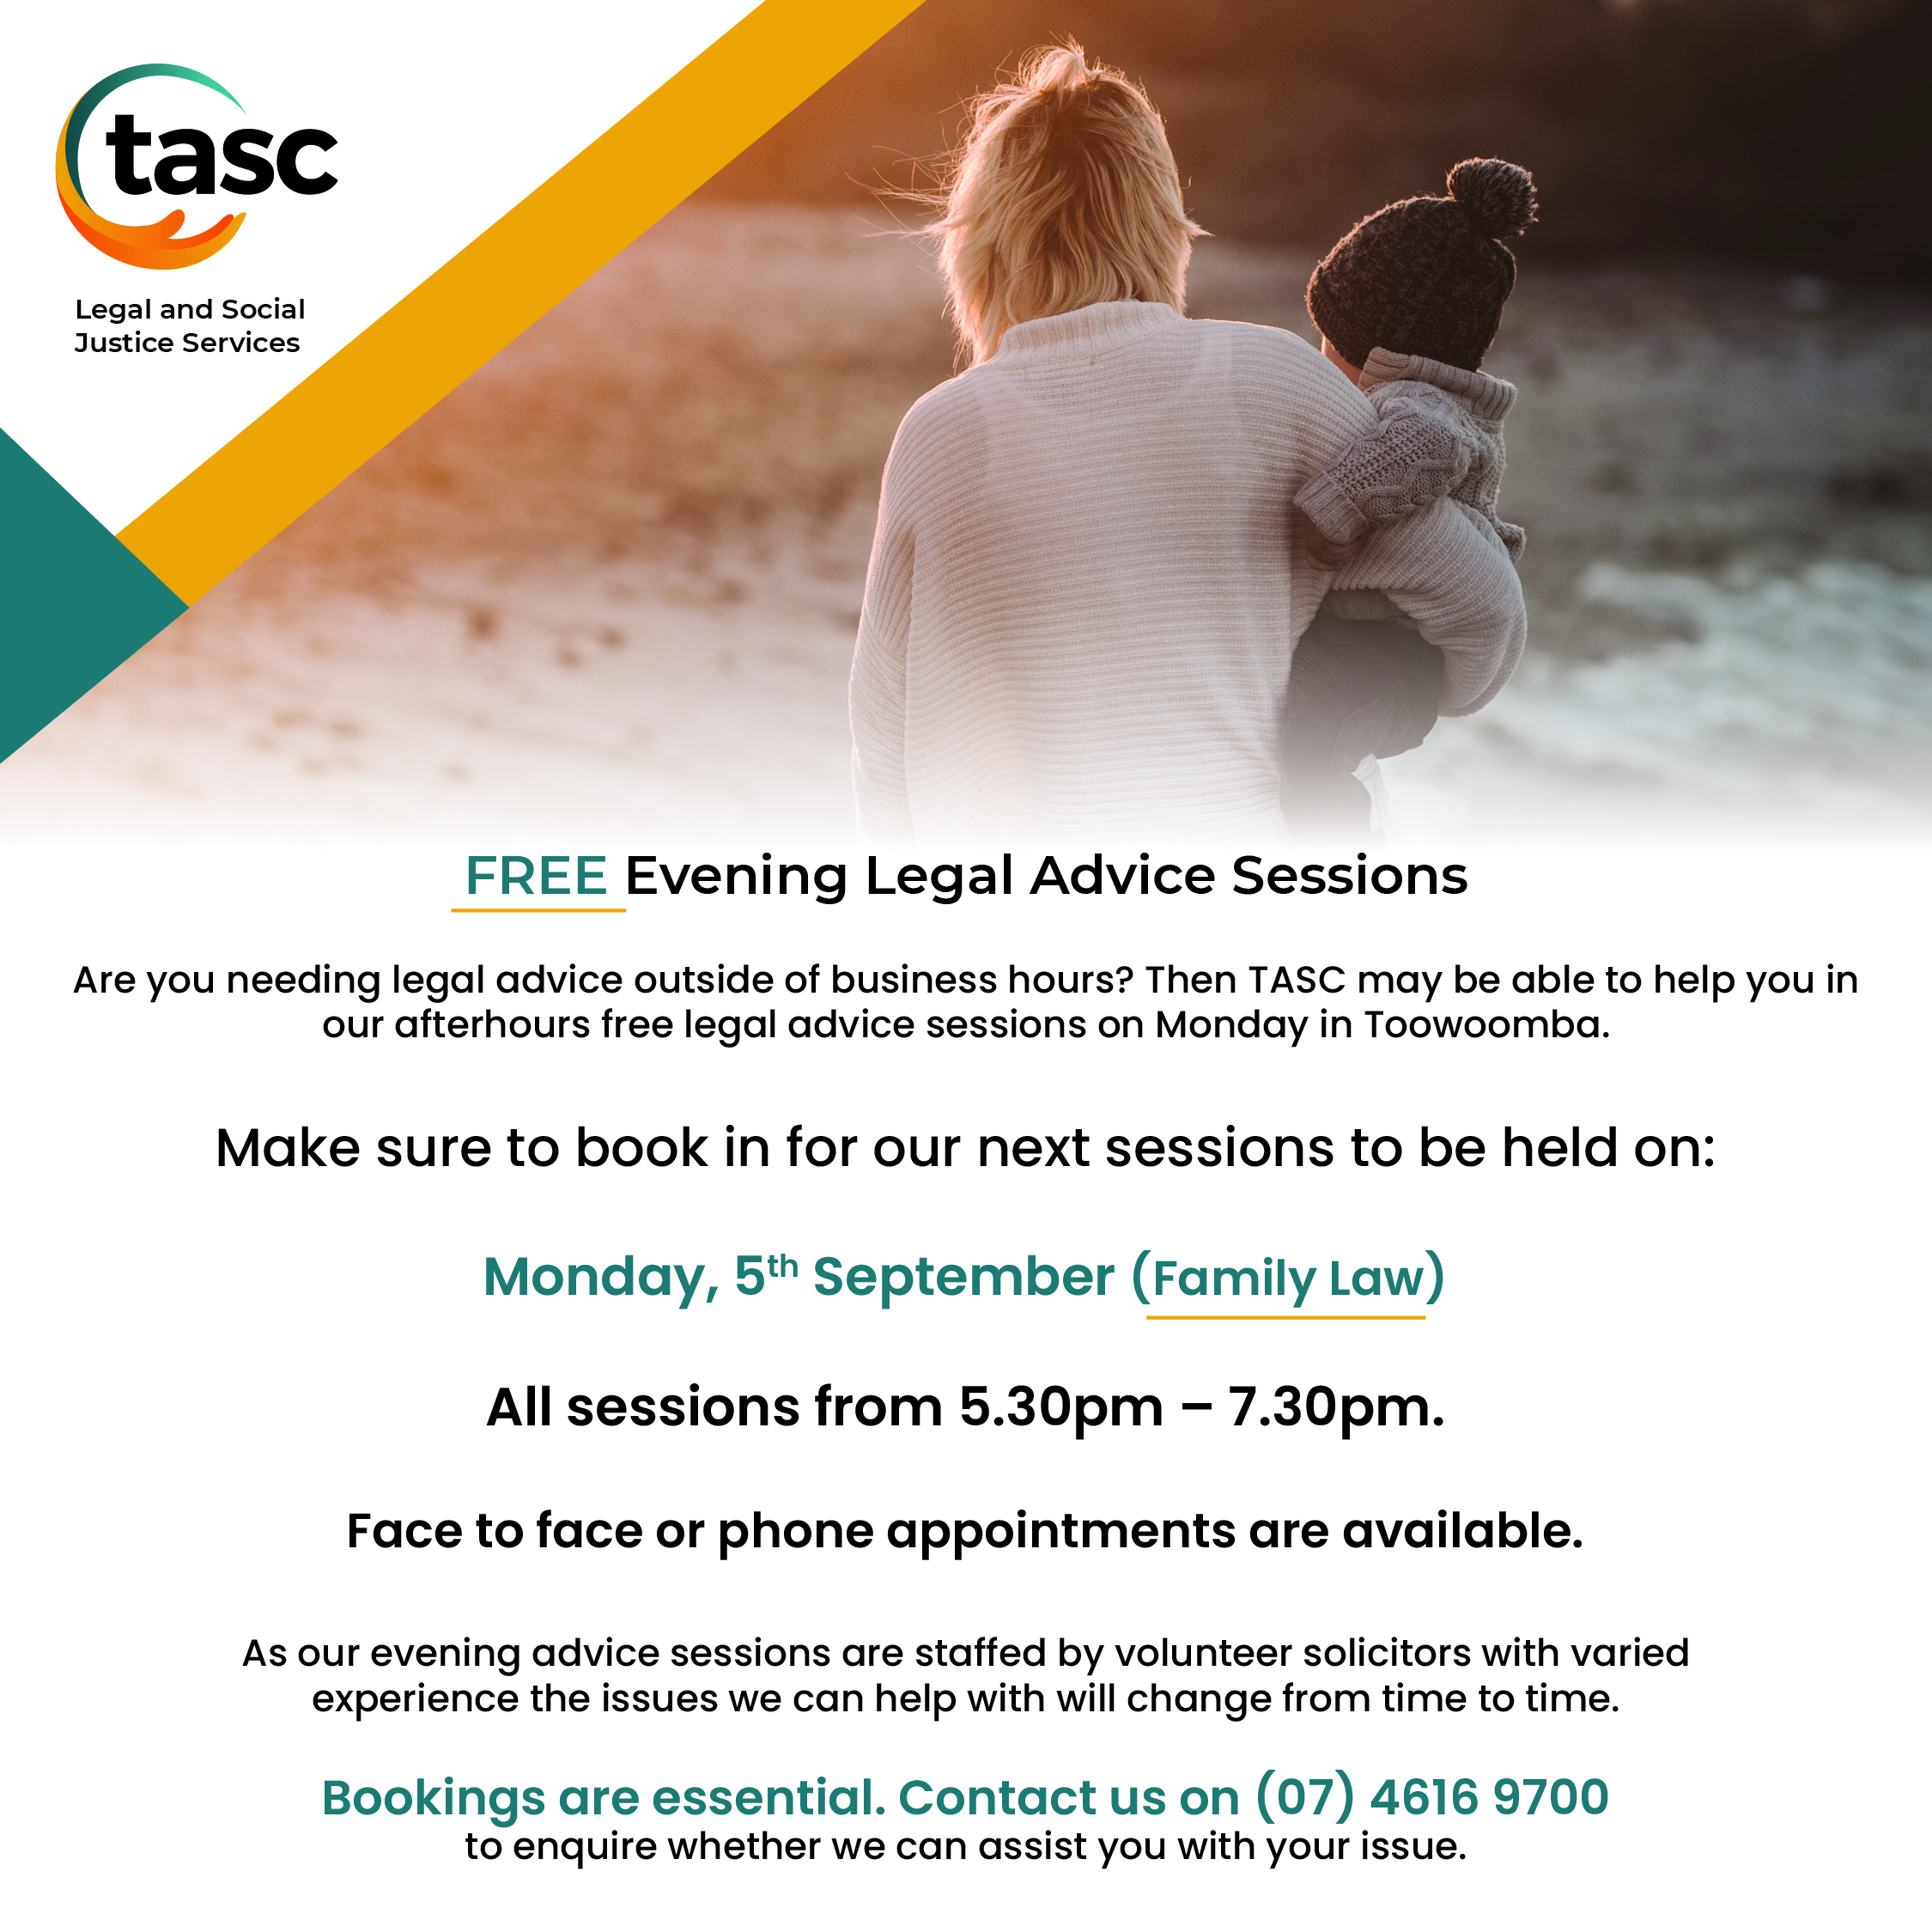 Free Evening Legal Advice Sessions (Family Law) Monday, 5 September 2022